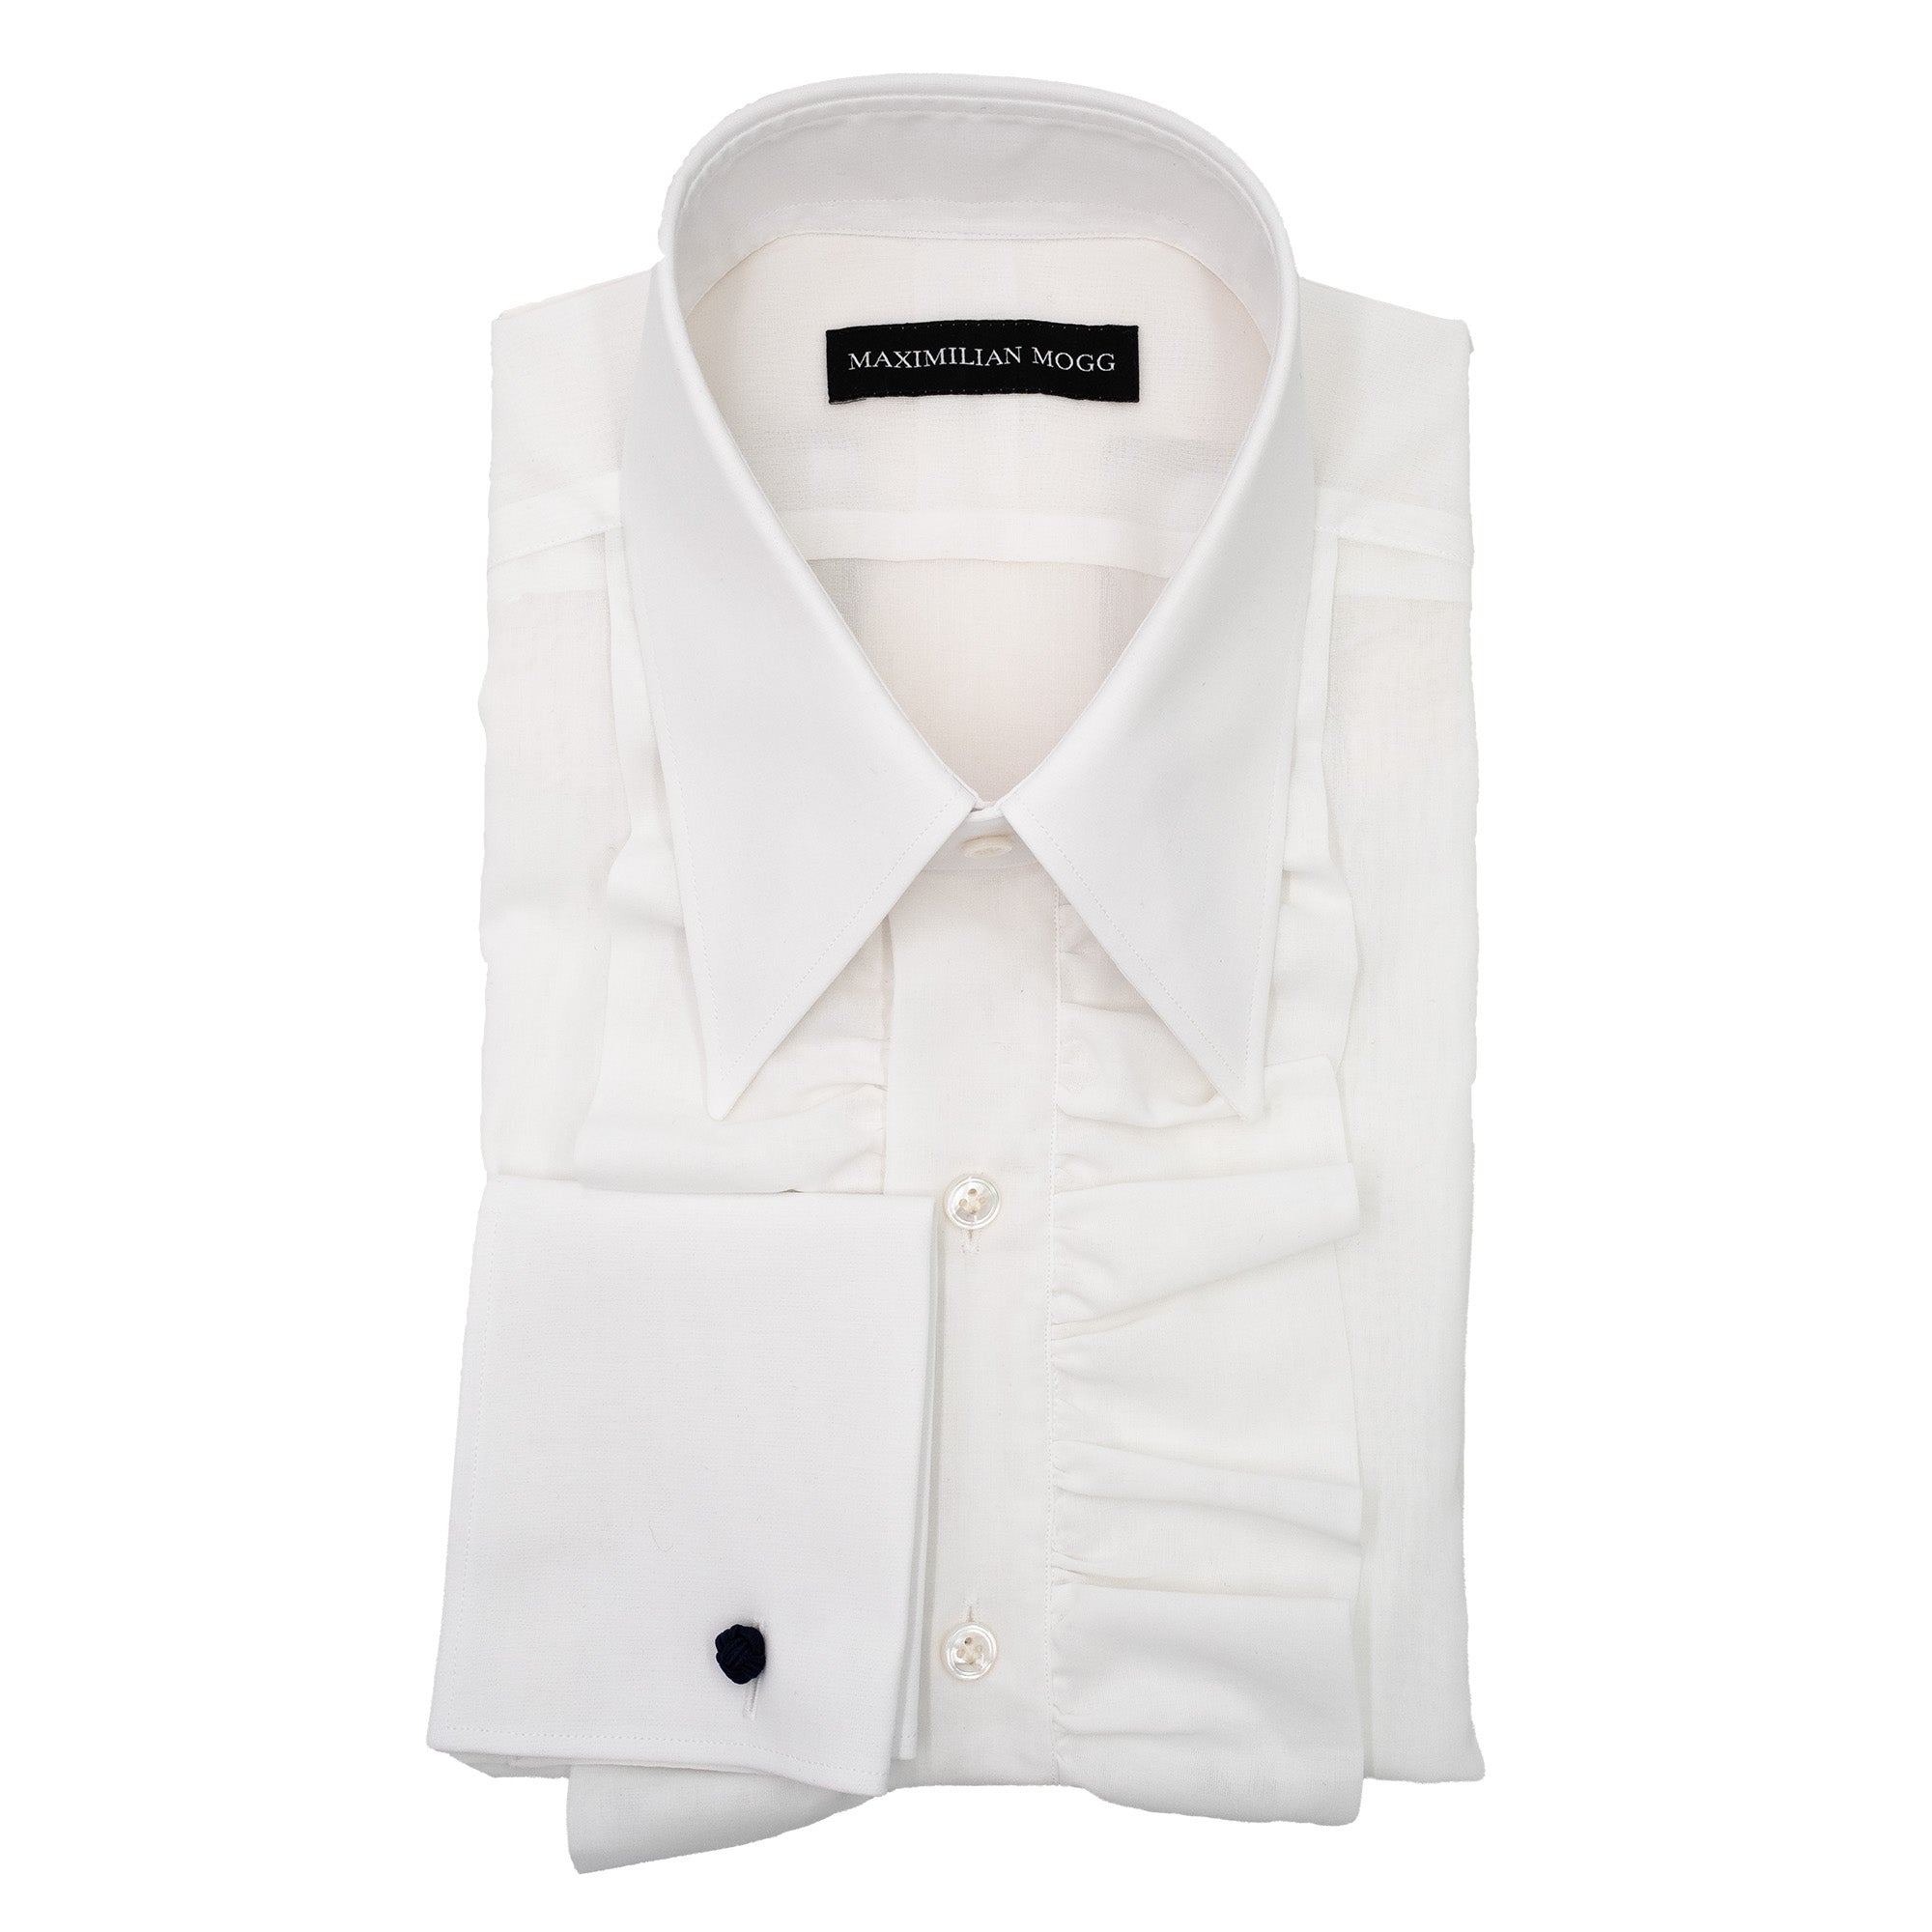 Shirt - White voile ruffle-front spearpoint